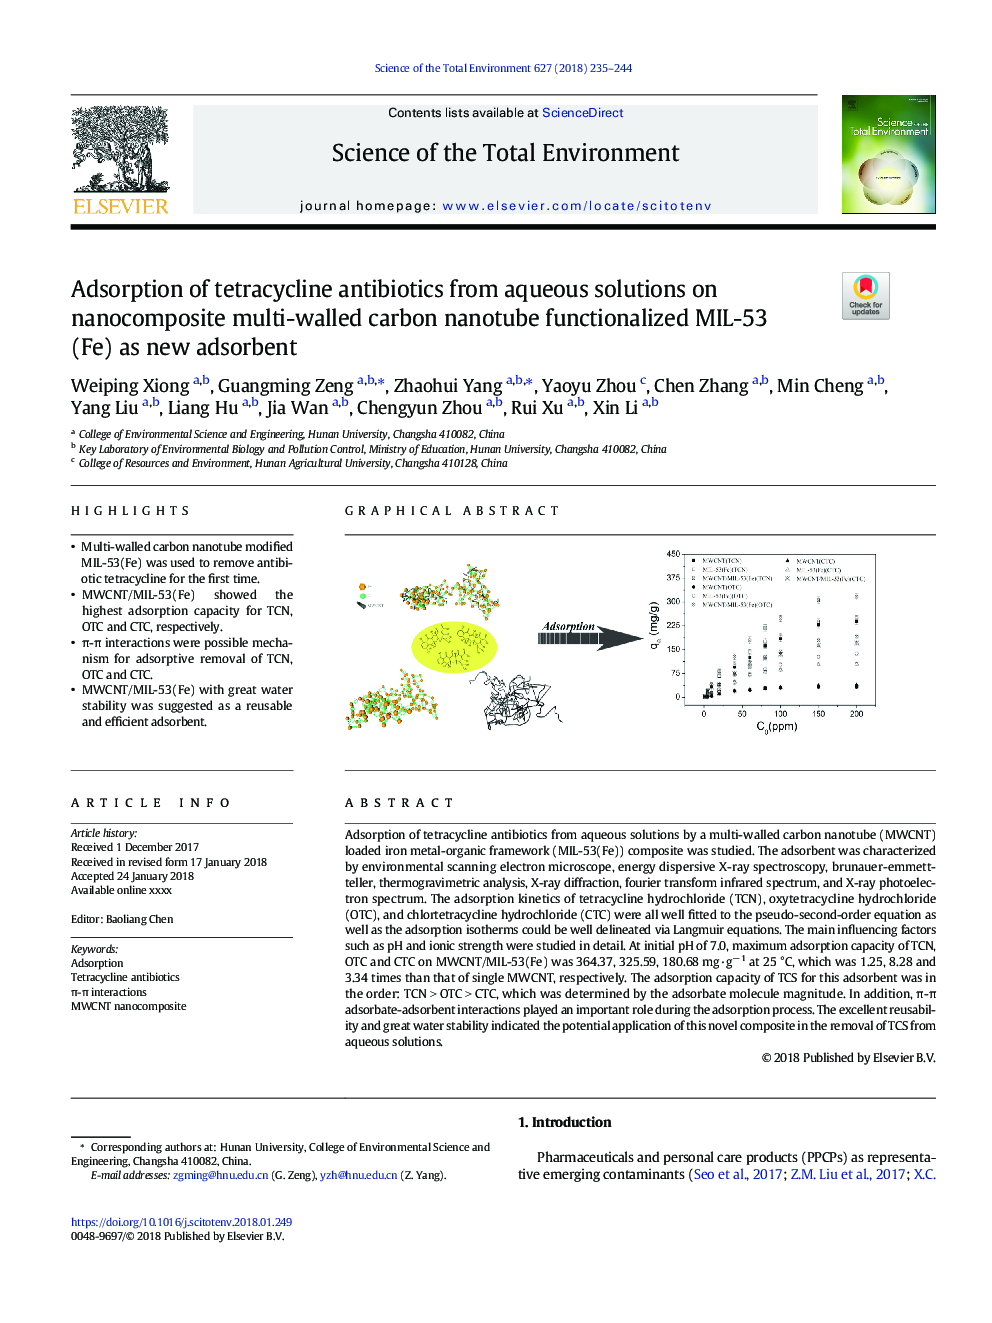 Adsorption of tetracycline antibiotics from aqueous solutions on nanocomposite multi-walled carbon nanotube functionalized MIL-53(Fe) as new adsorbent